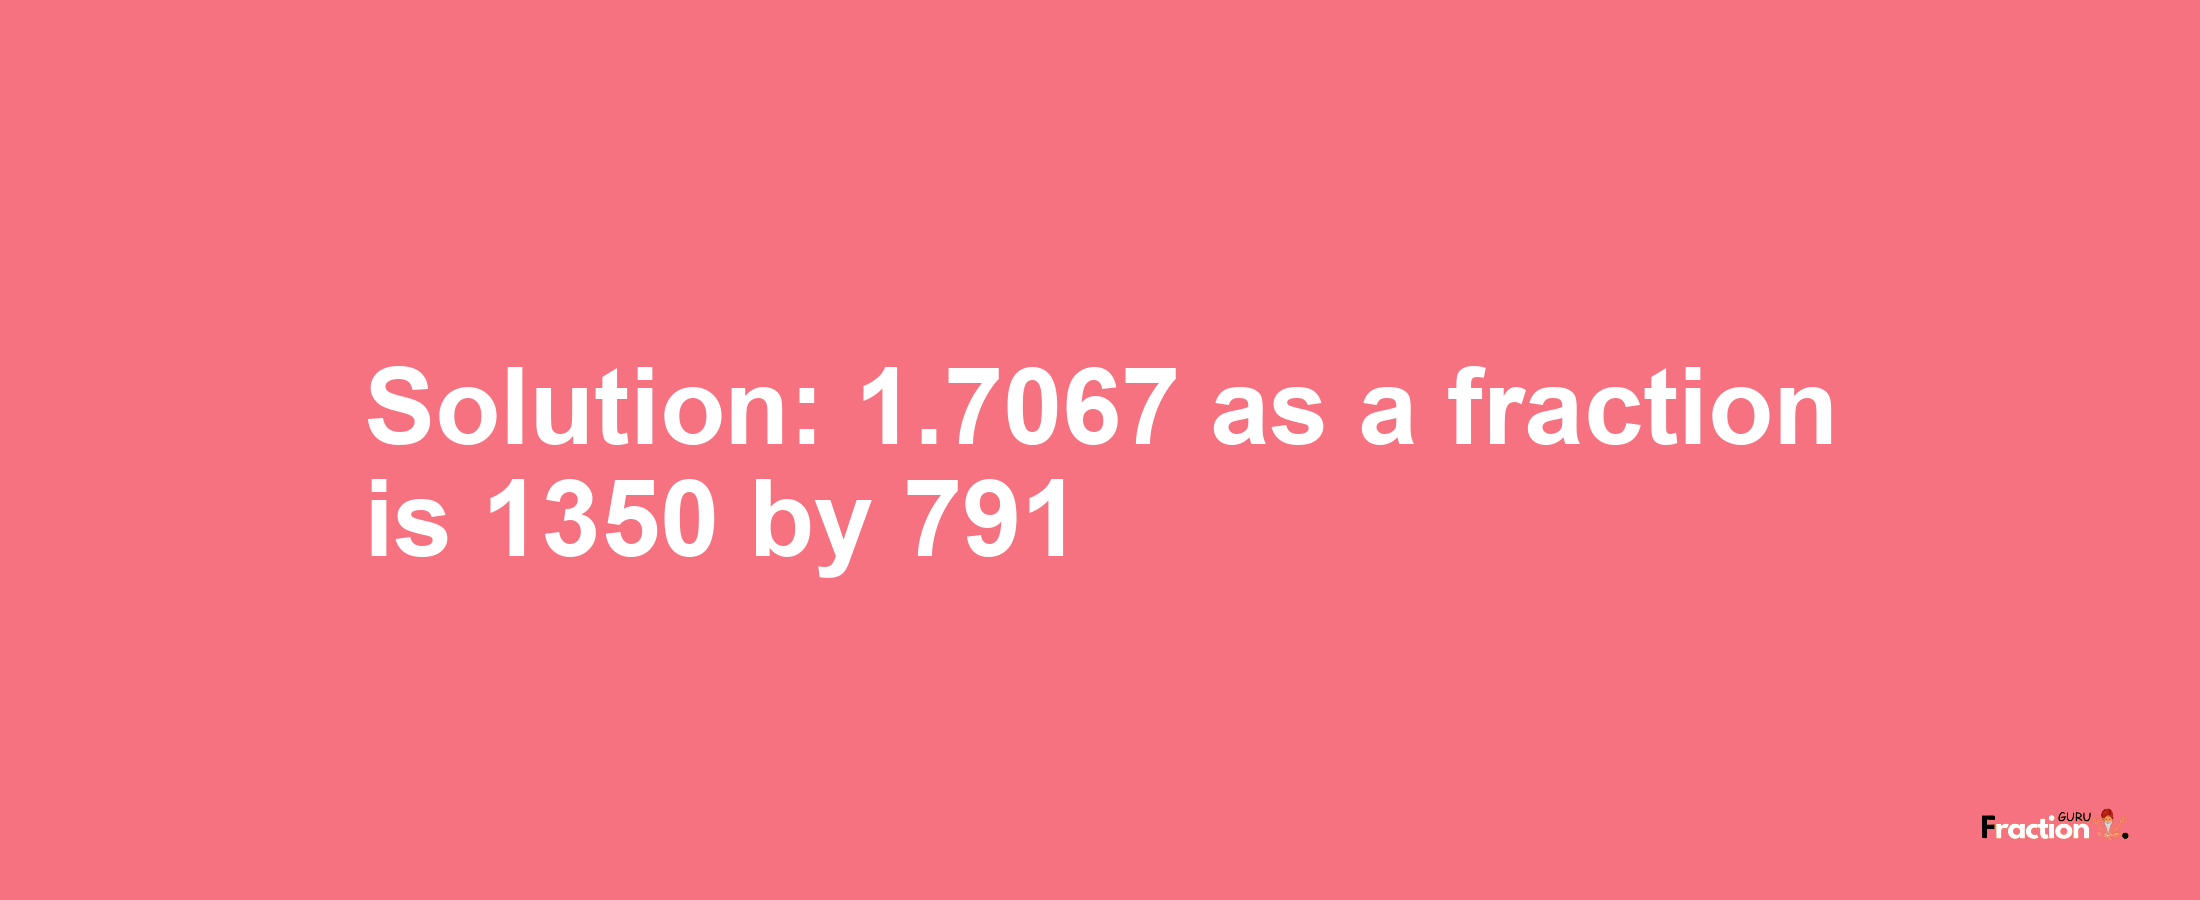 Solution:1.7067 as a fraction is 1350/791